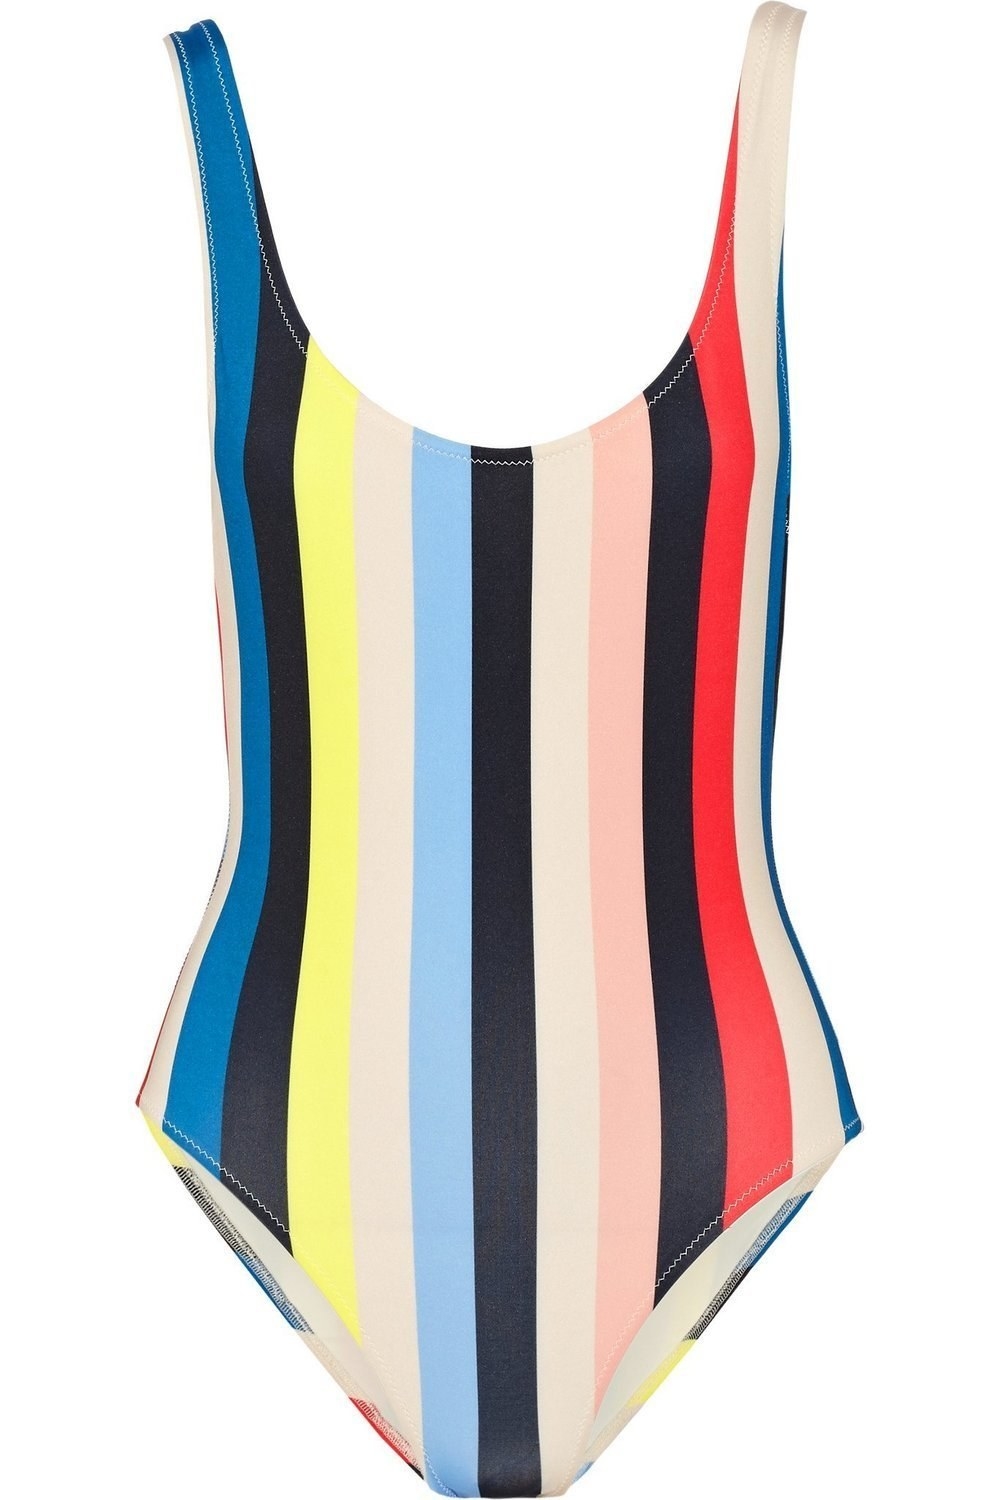 29 One-Piece Bathing Suits That Are So Much Better Than A Bikini